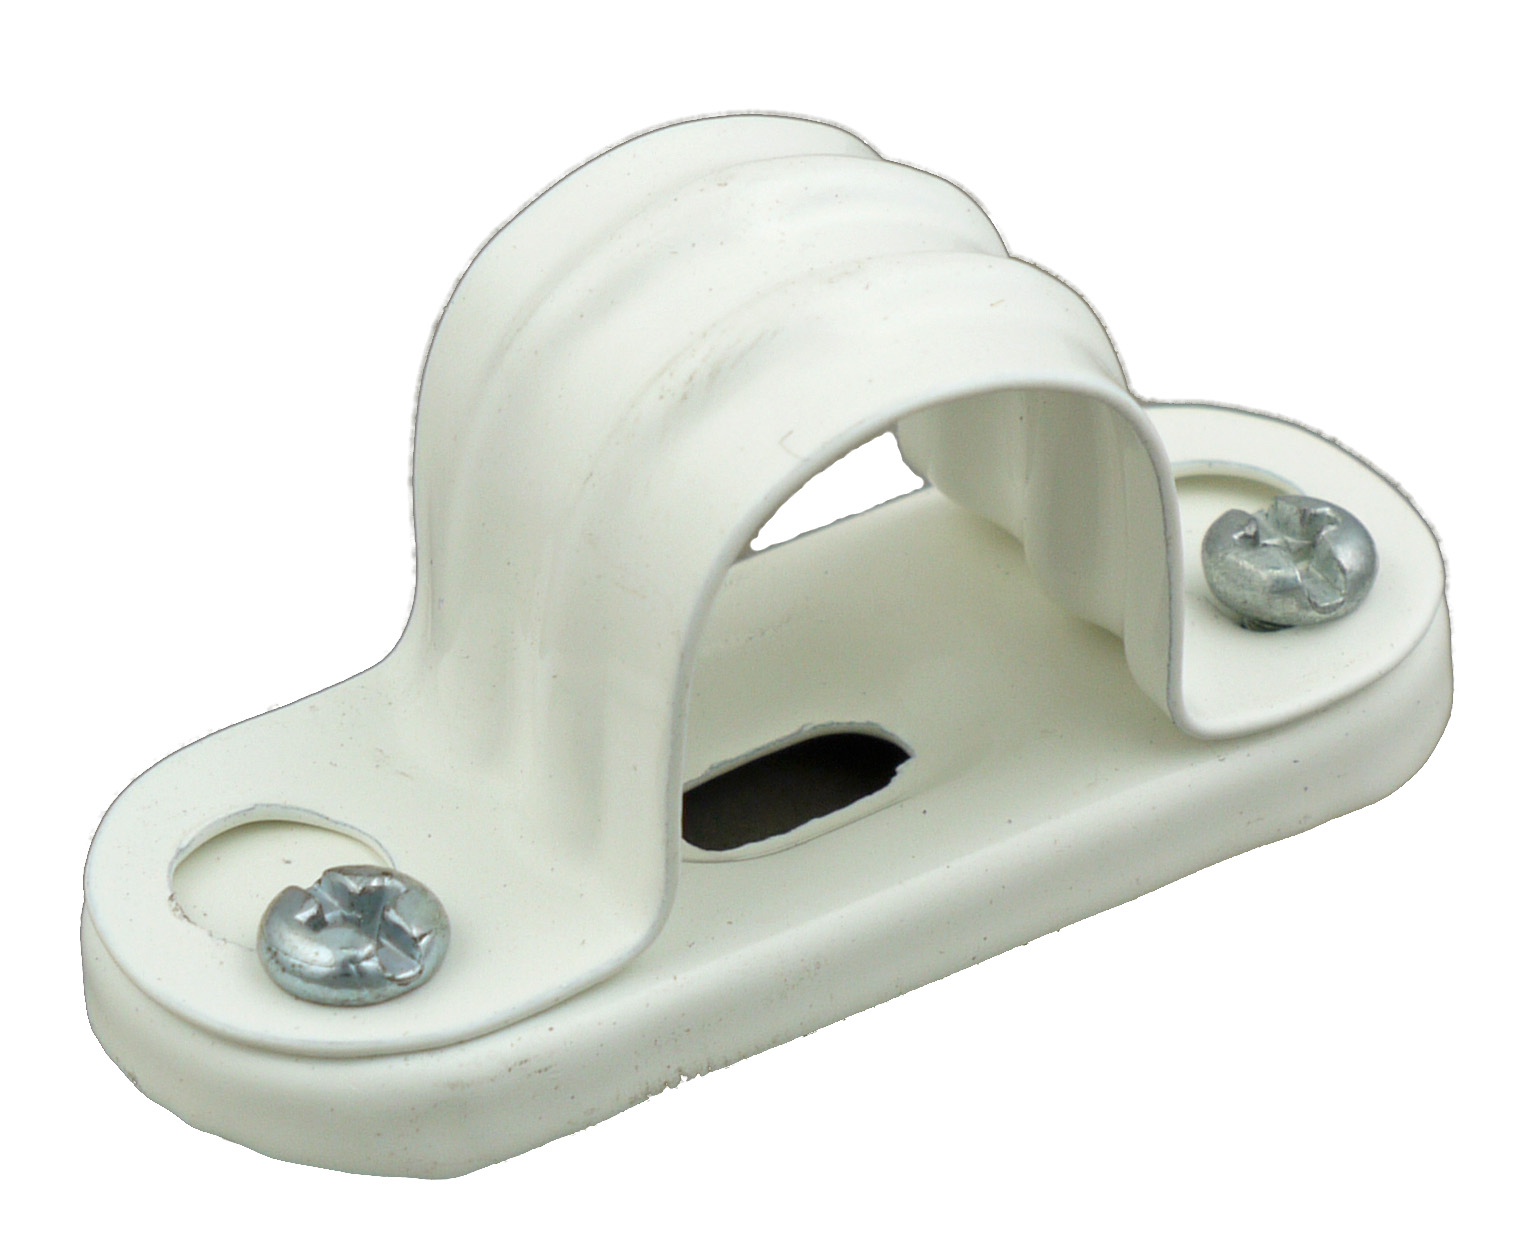 10 x White Steel Spacer Bar Saddles for 25mm Conduit Conforms to New Fire Regs